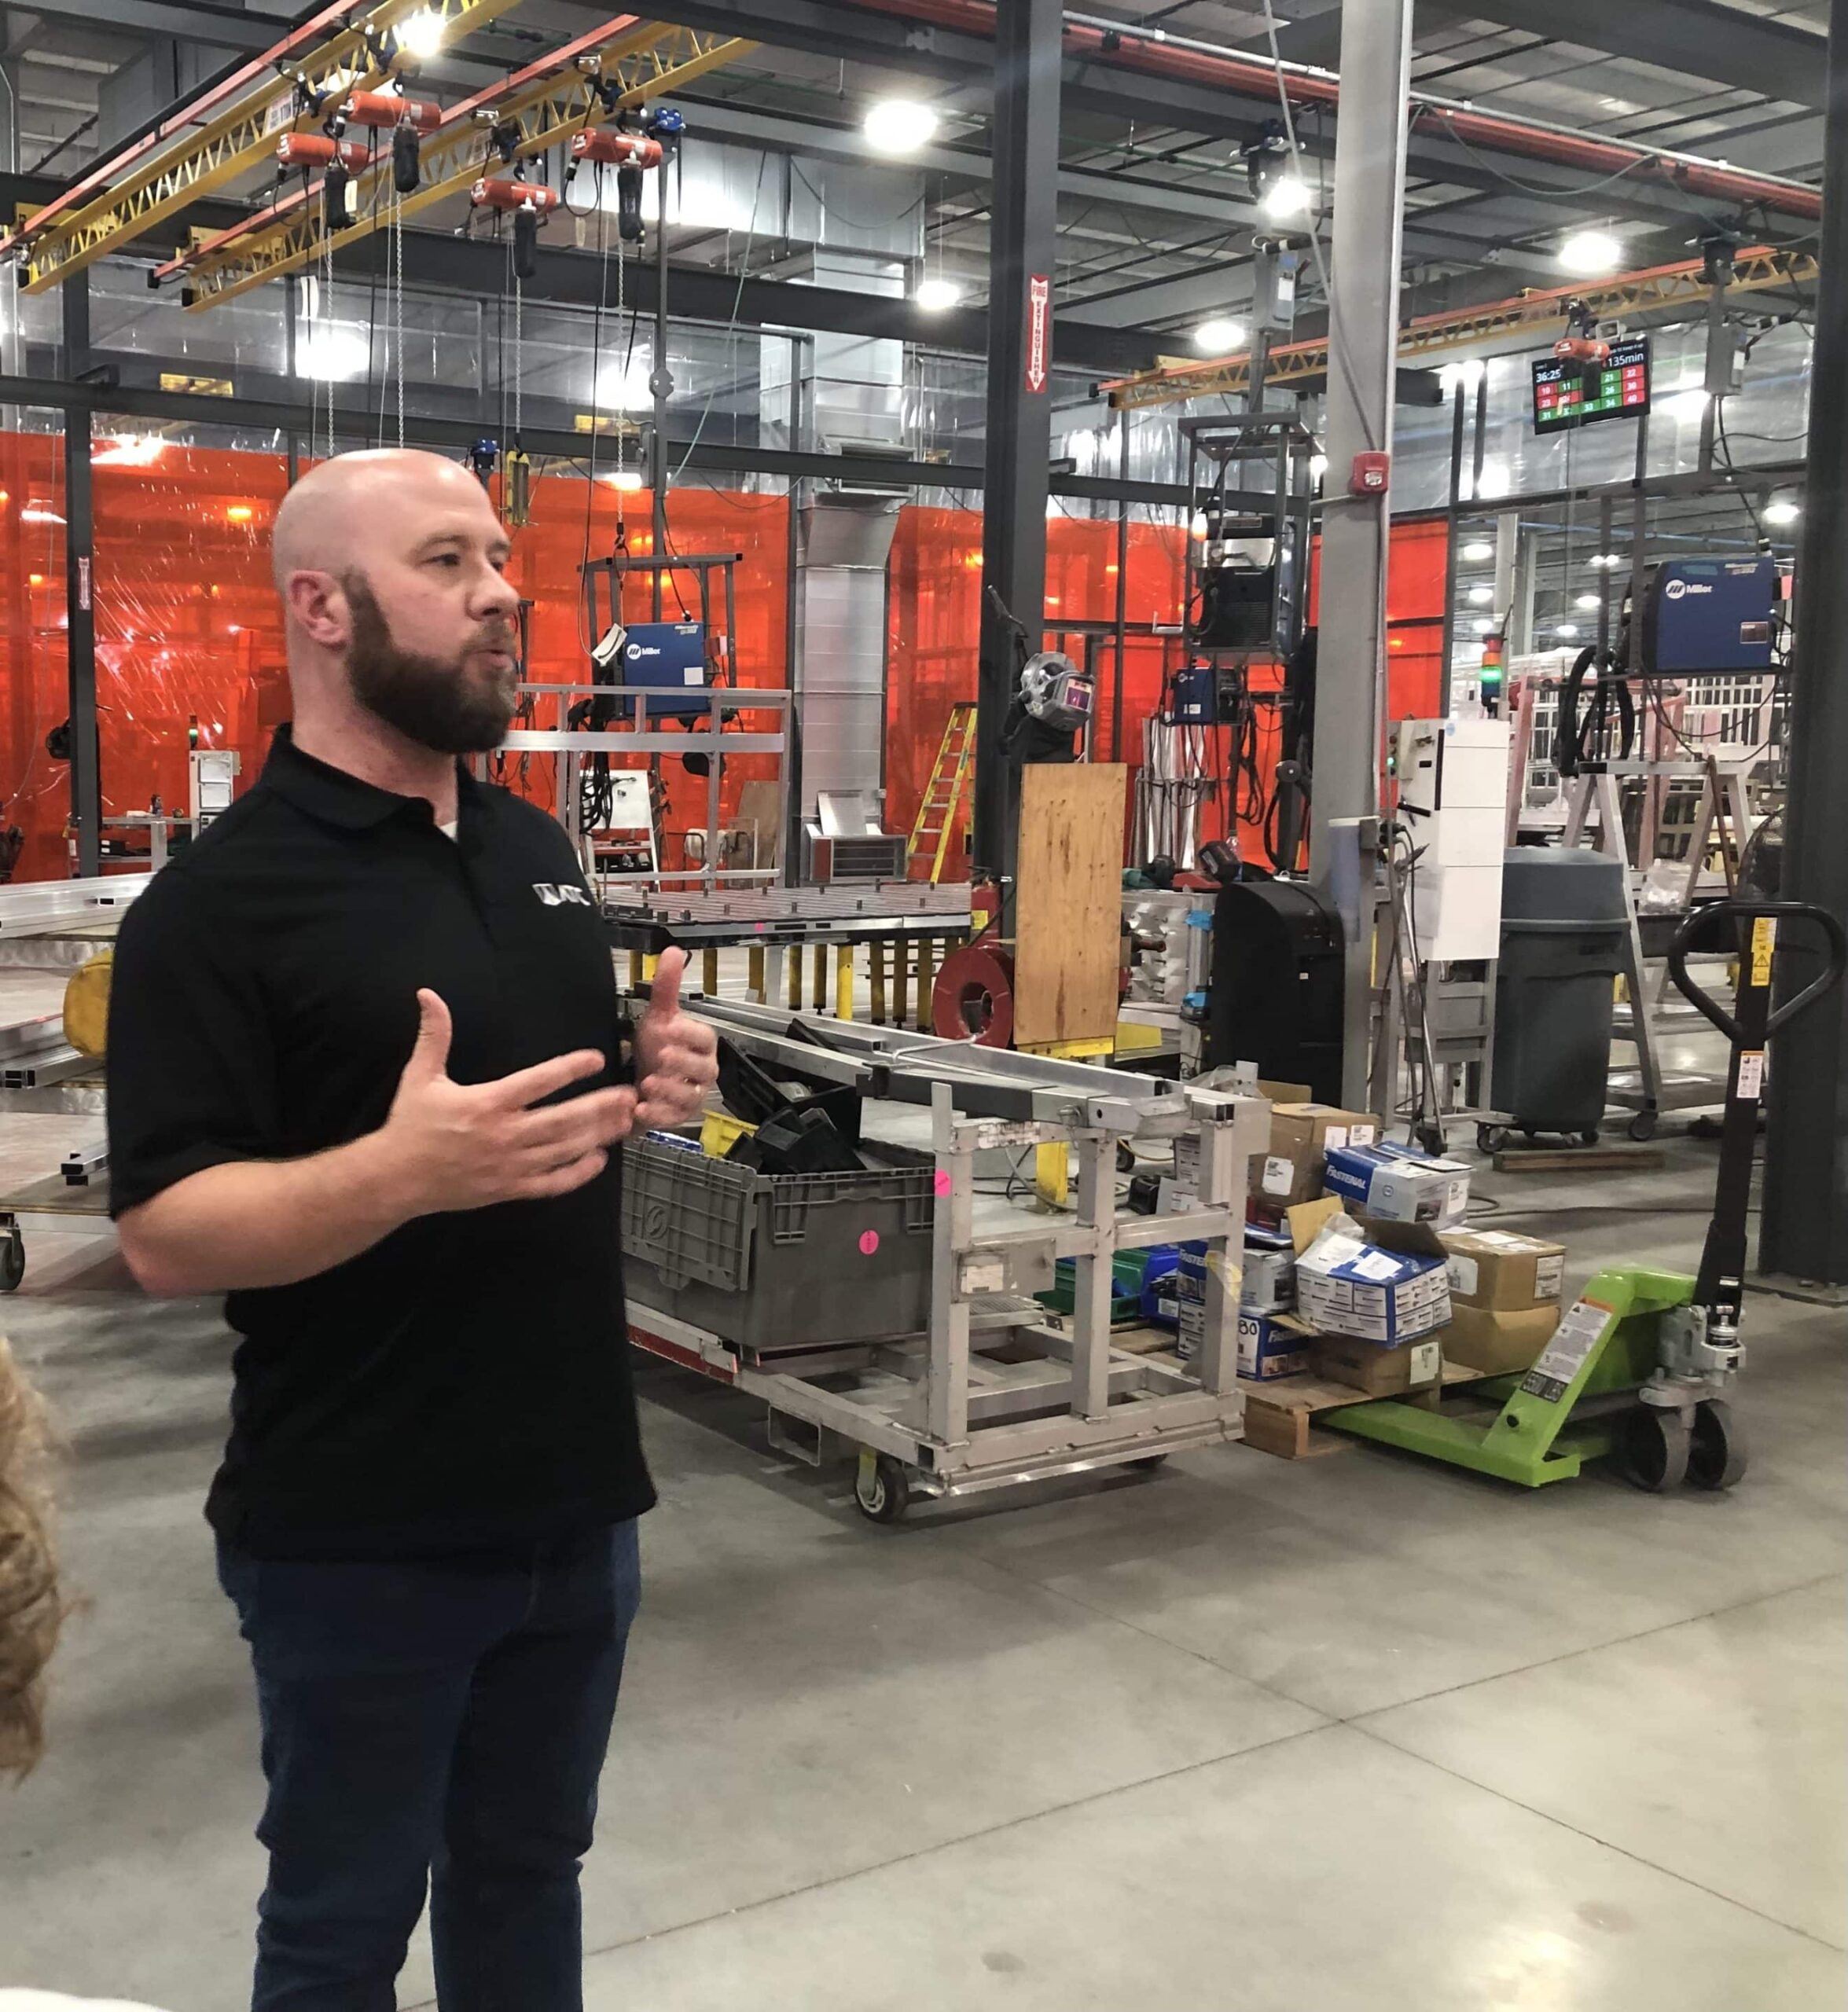 ATC Hosts Grand Opening at New Facility in Nappanee, Ind. – RVBusiness – Breaking RV Industry News